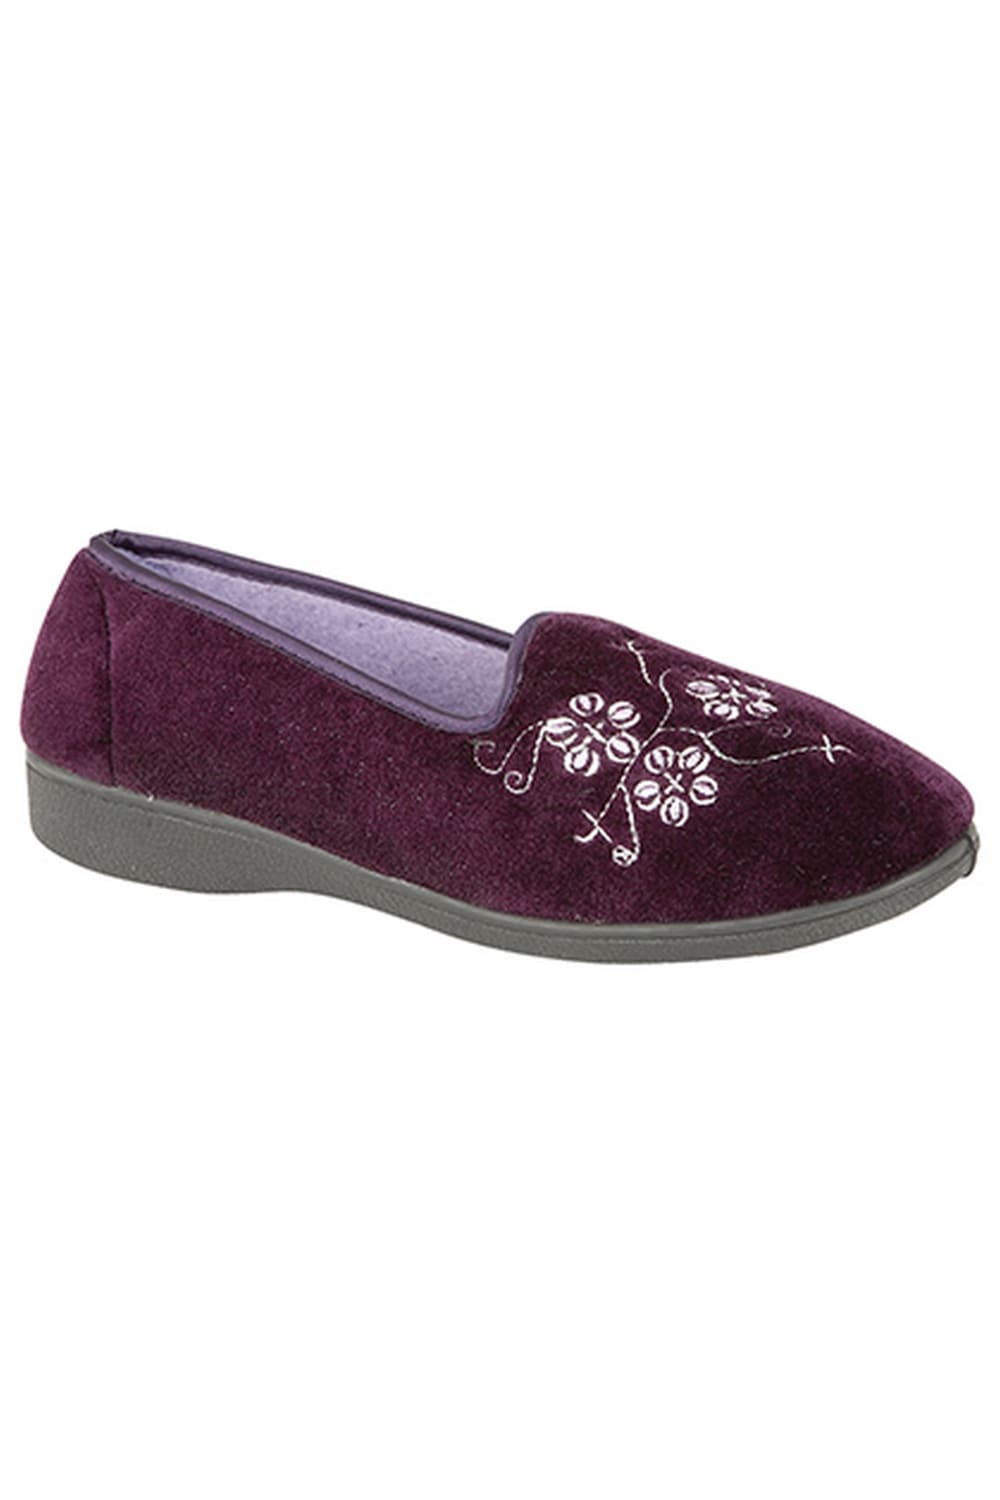 Womens/Ladies Jenny Embroidered Slippers - Purple